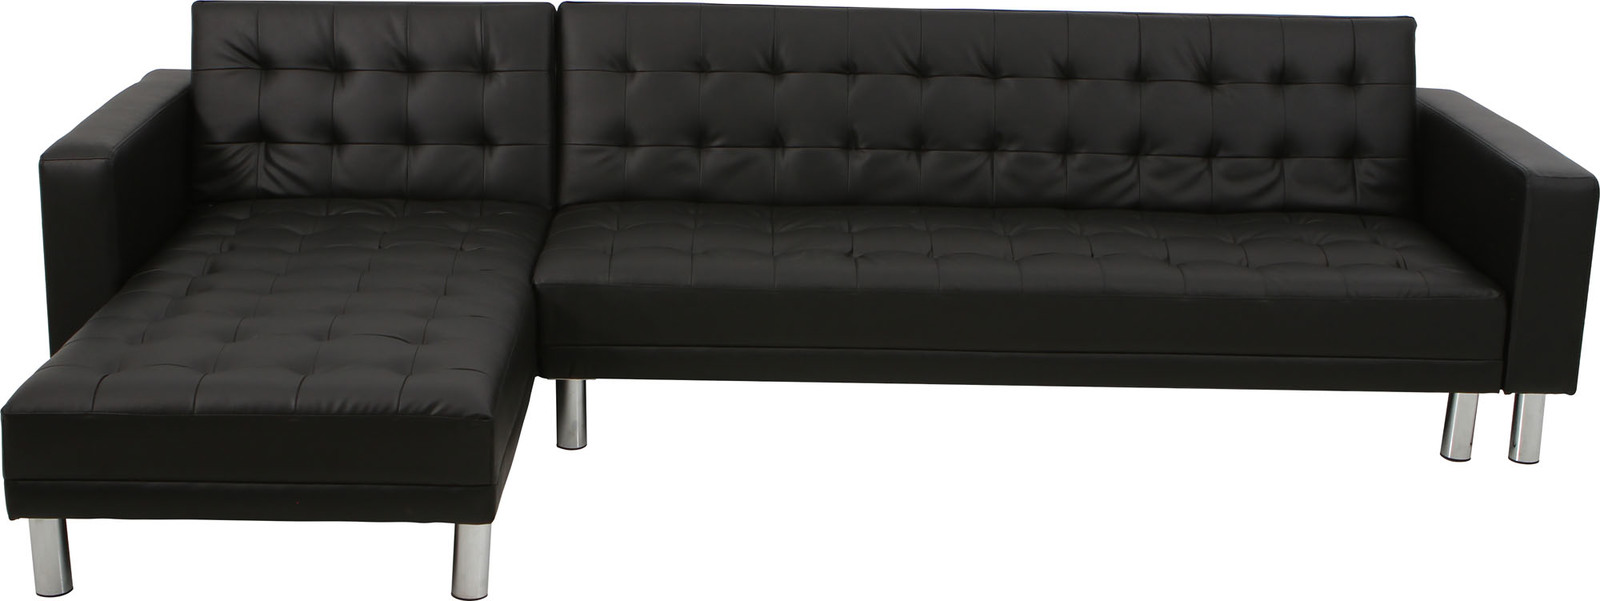 Ultima 4 Seater Sectional Sofa Bed Lounge Black 